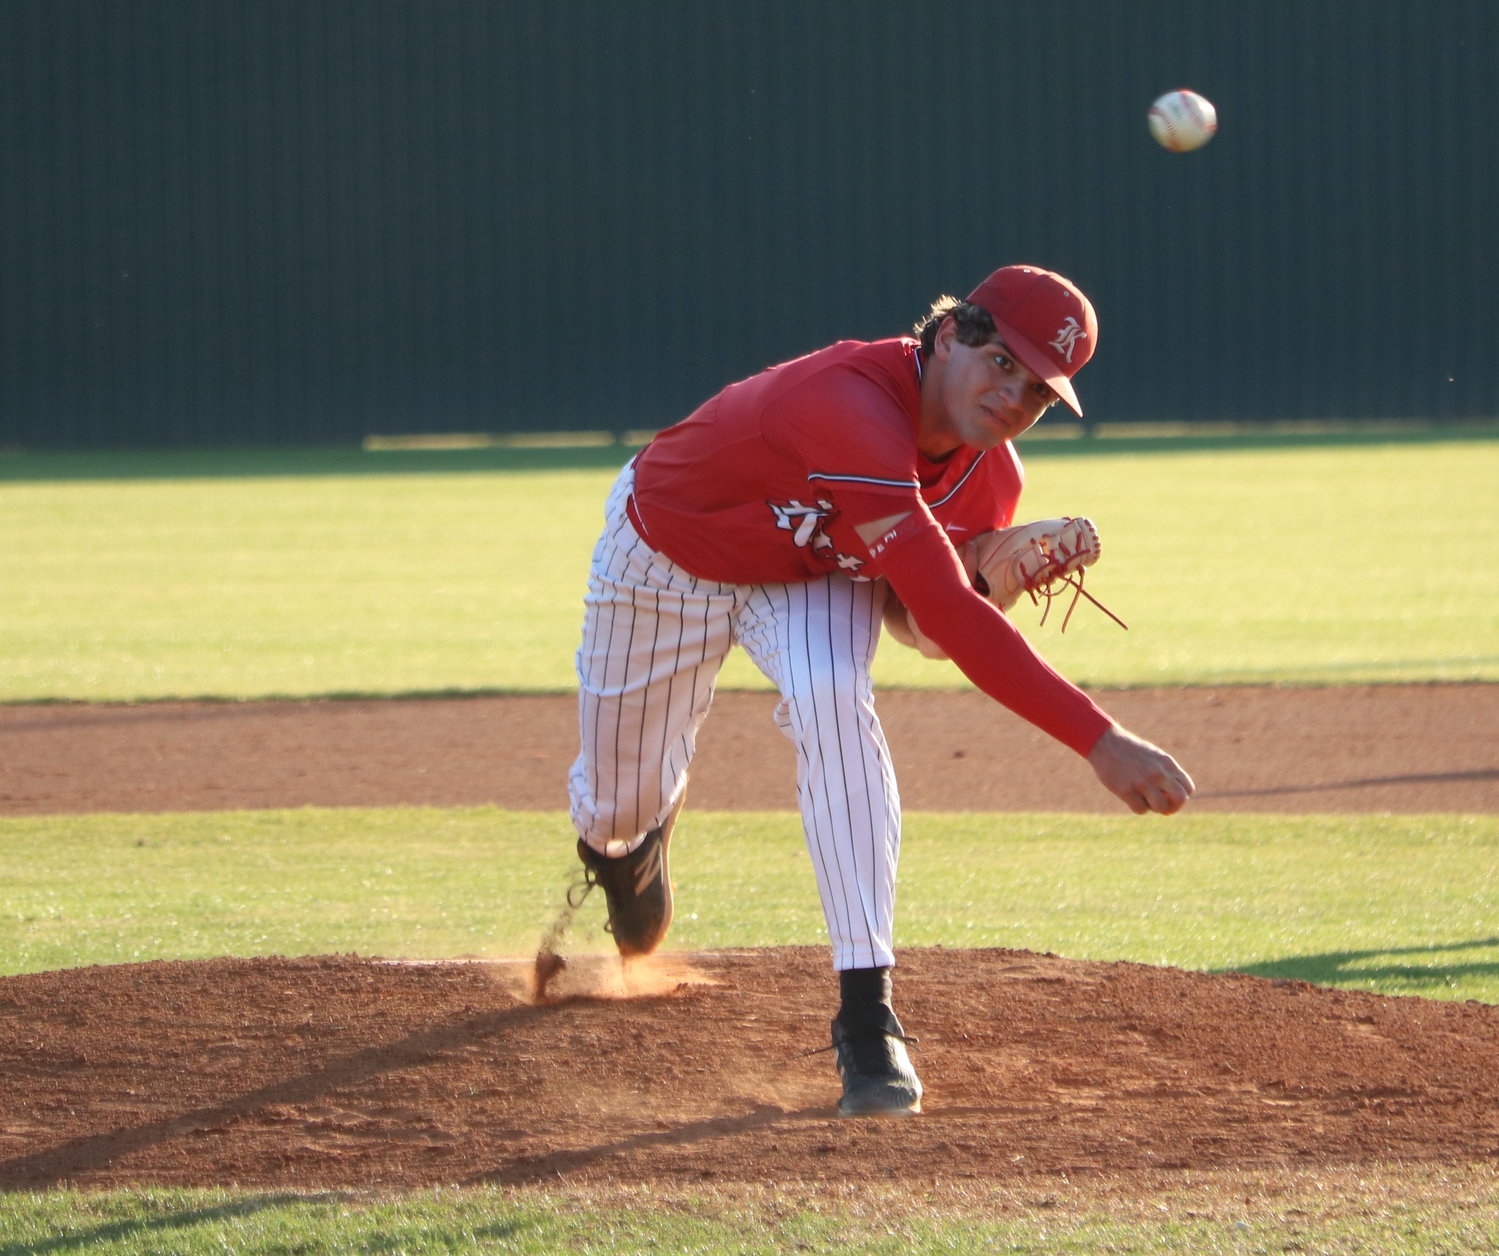 Cole Kaase pitches during Tuesday’s game between Katy and Mayde Creek at the Mayde Creek baseball field.